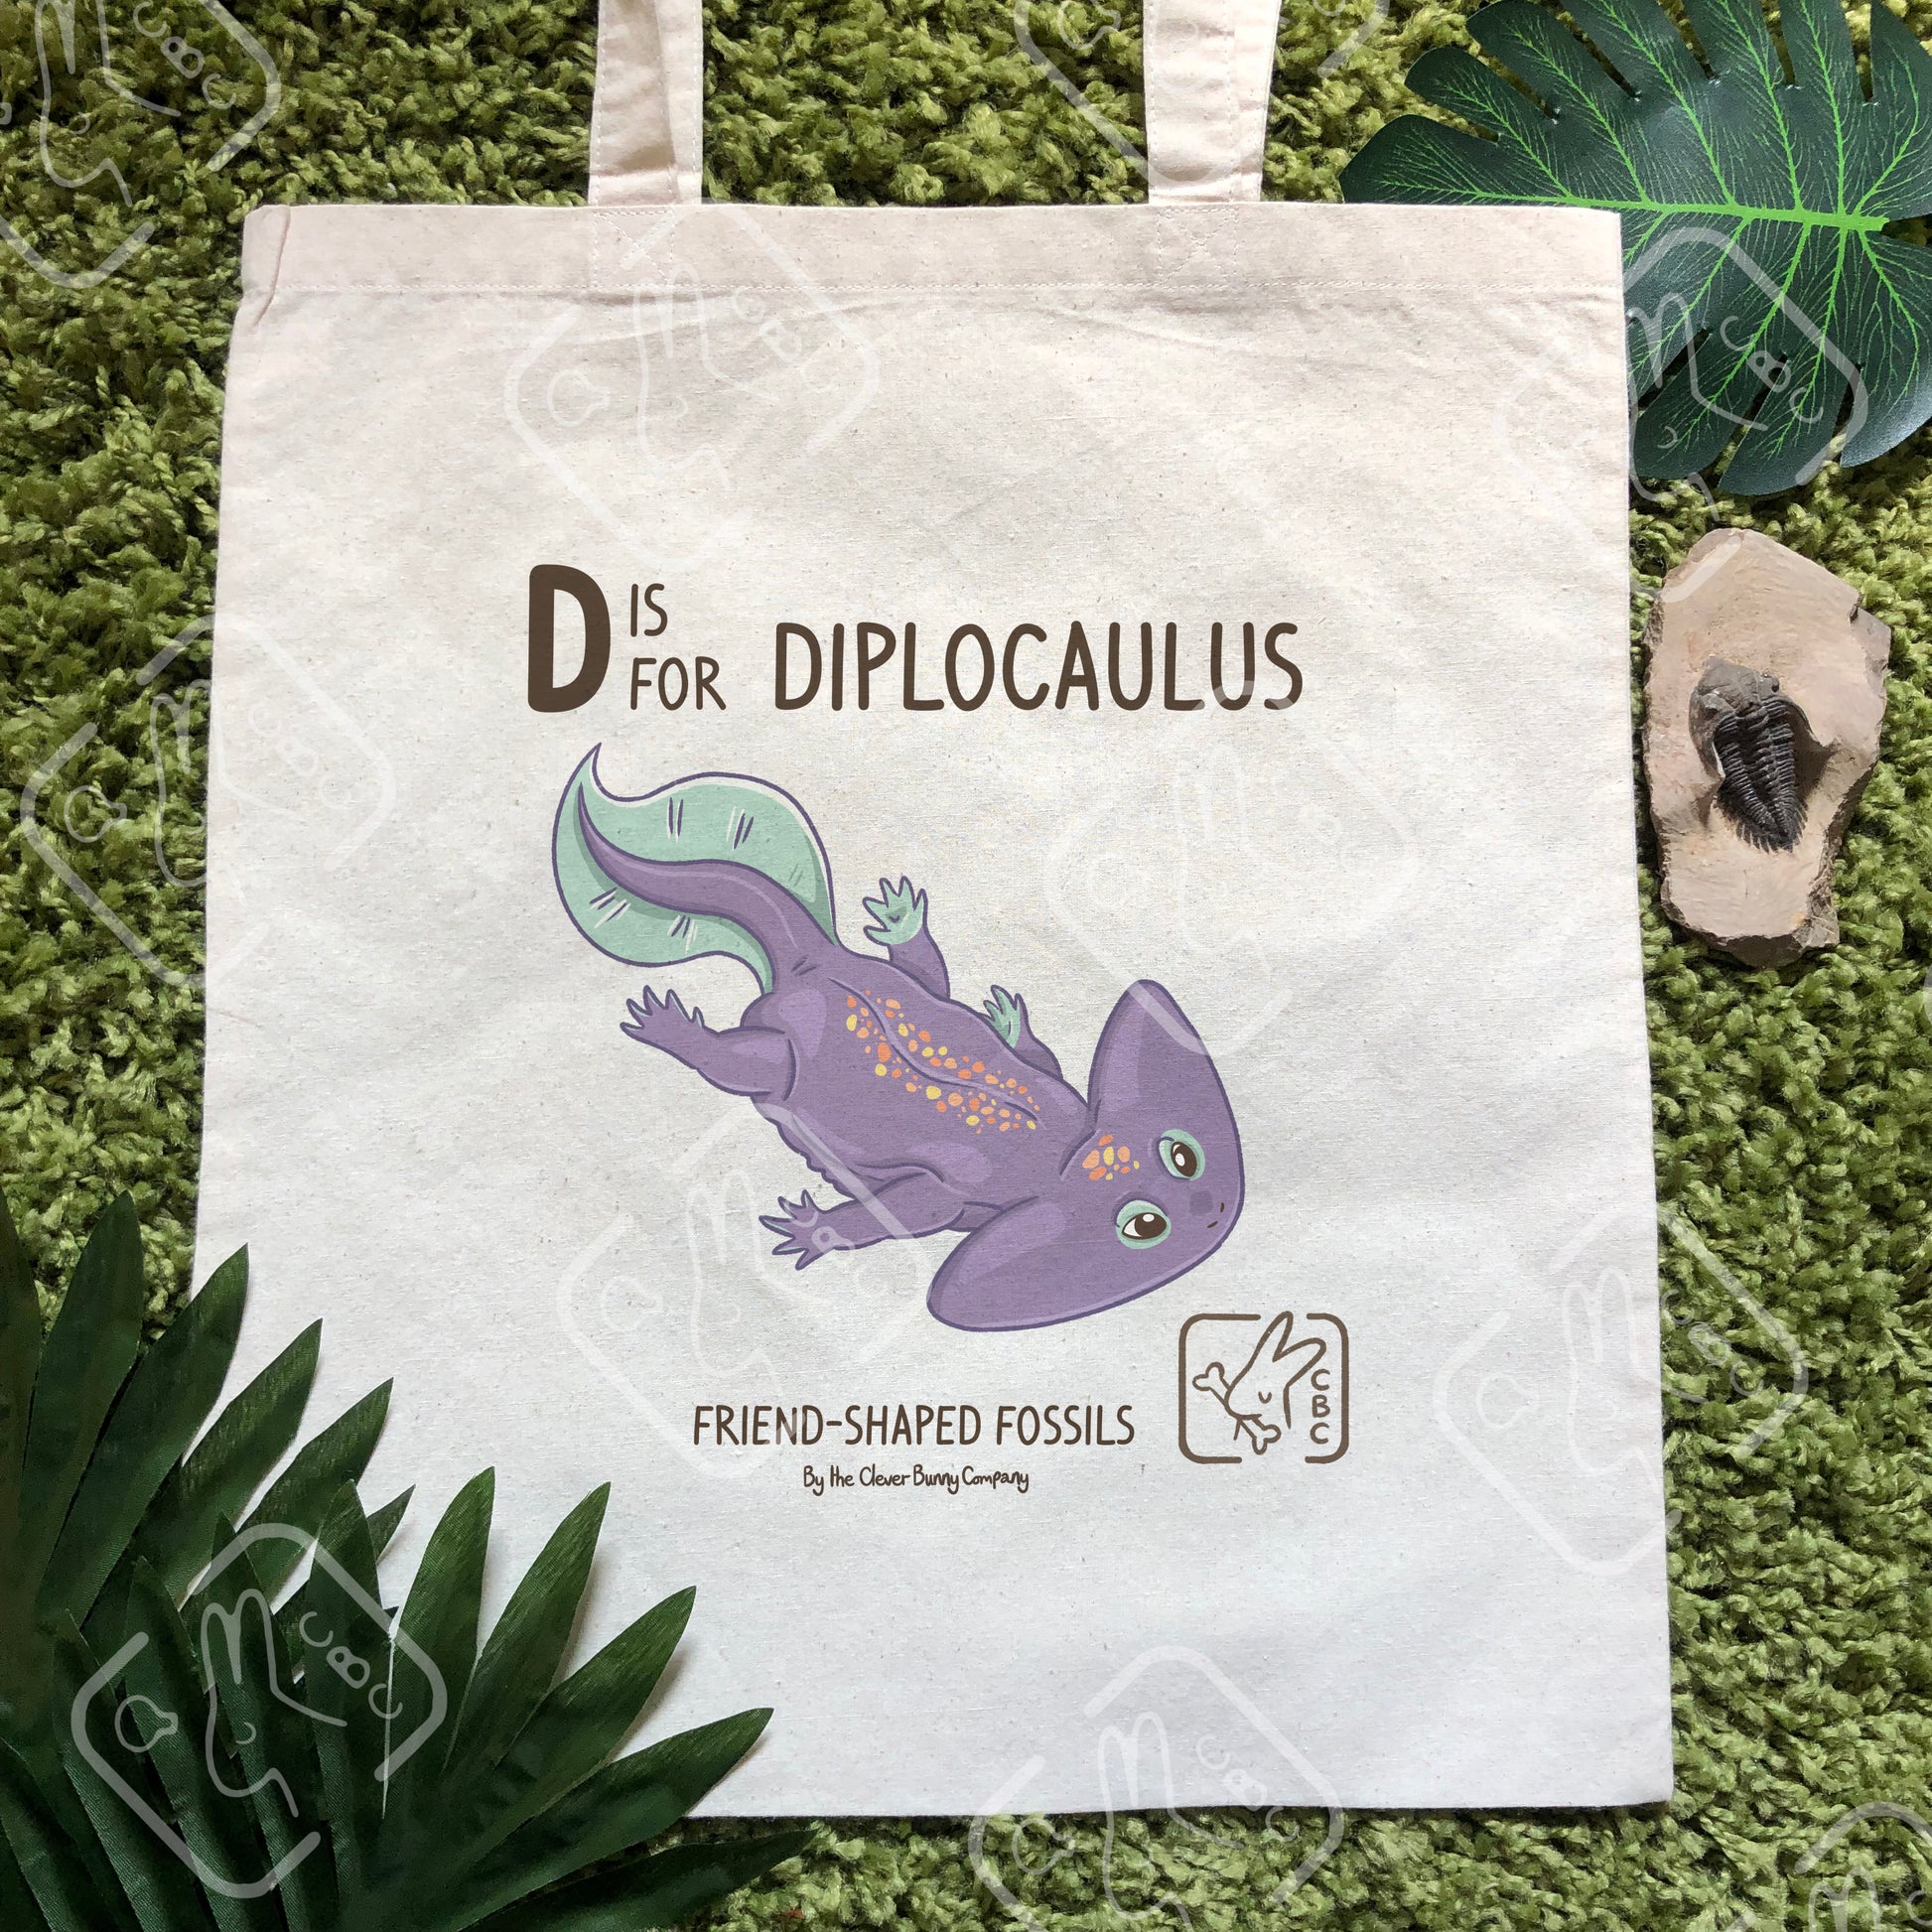 A tote bag featuring a purple Diplocaulus. Text reads "D is for Diplocaulus" and "Friend-shaped Fossils by the Clever Bunny Company."